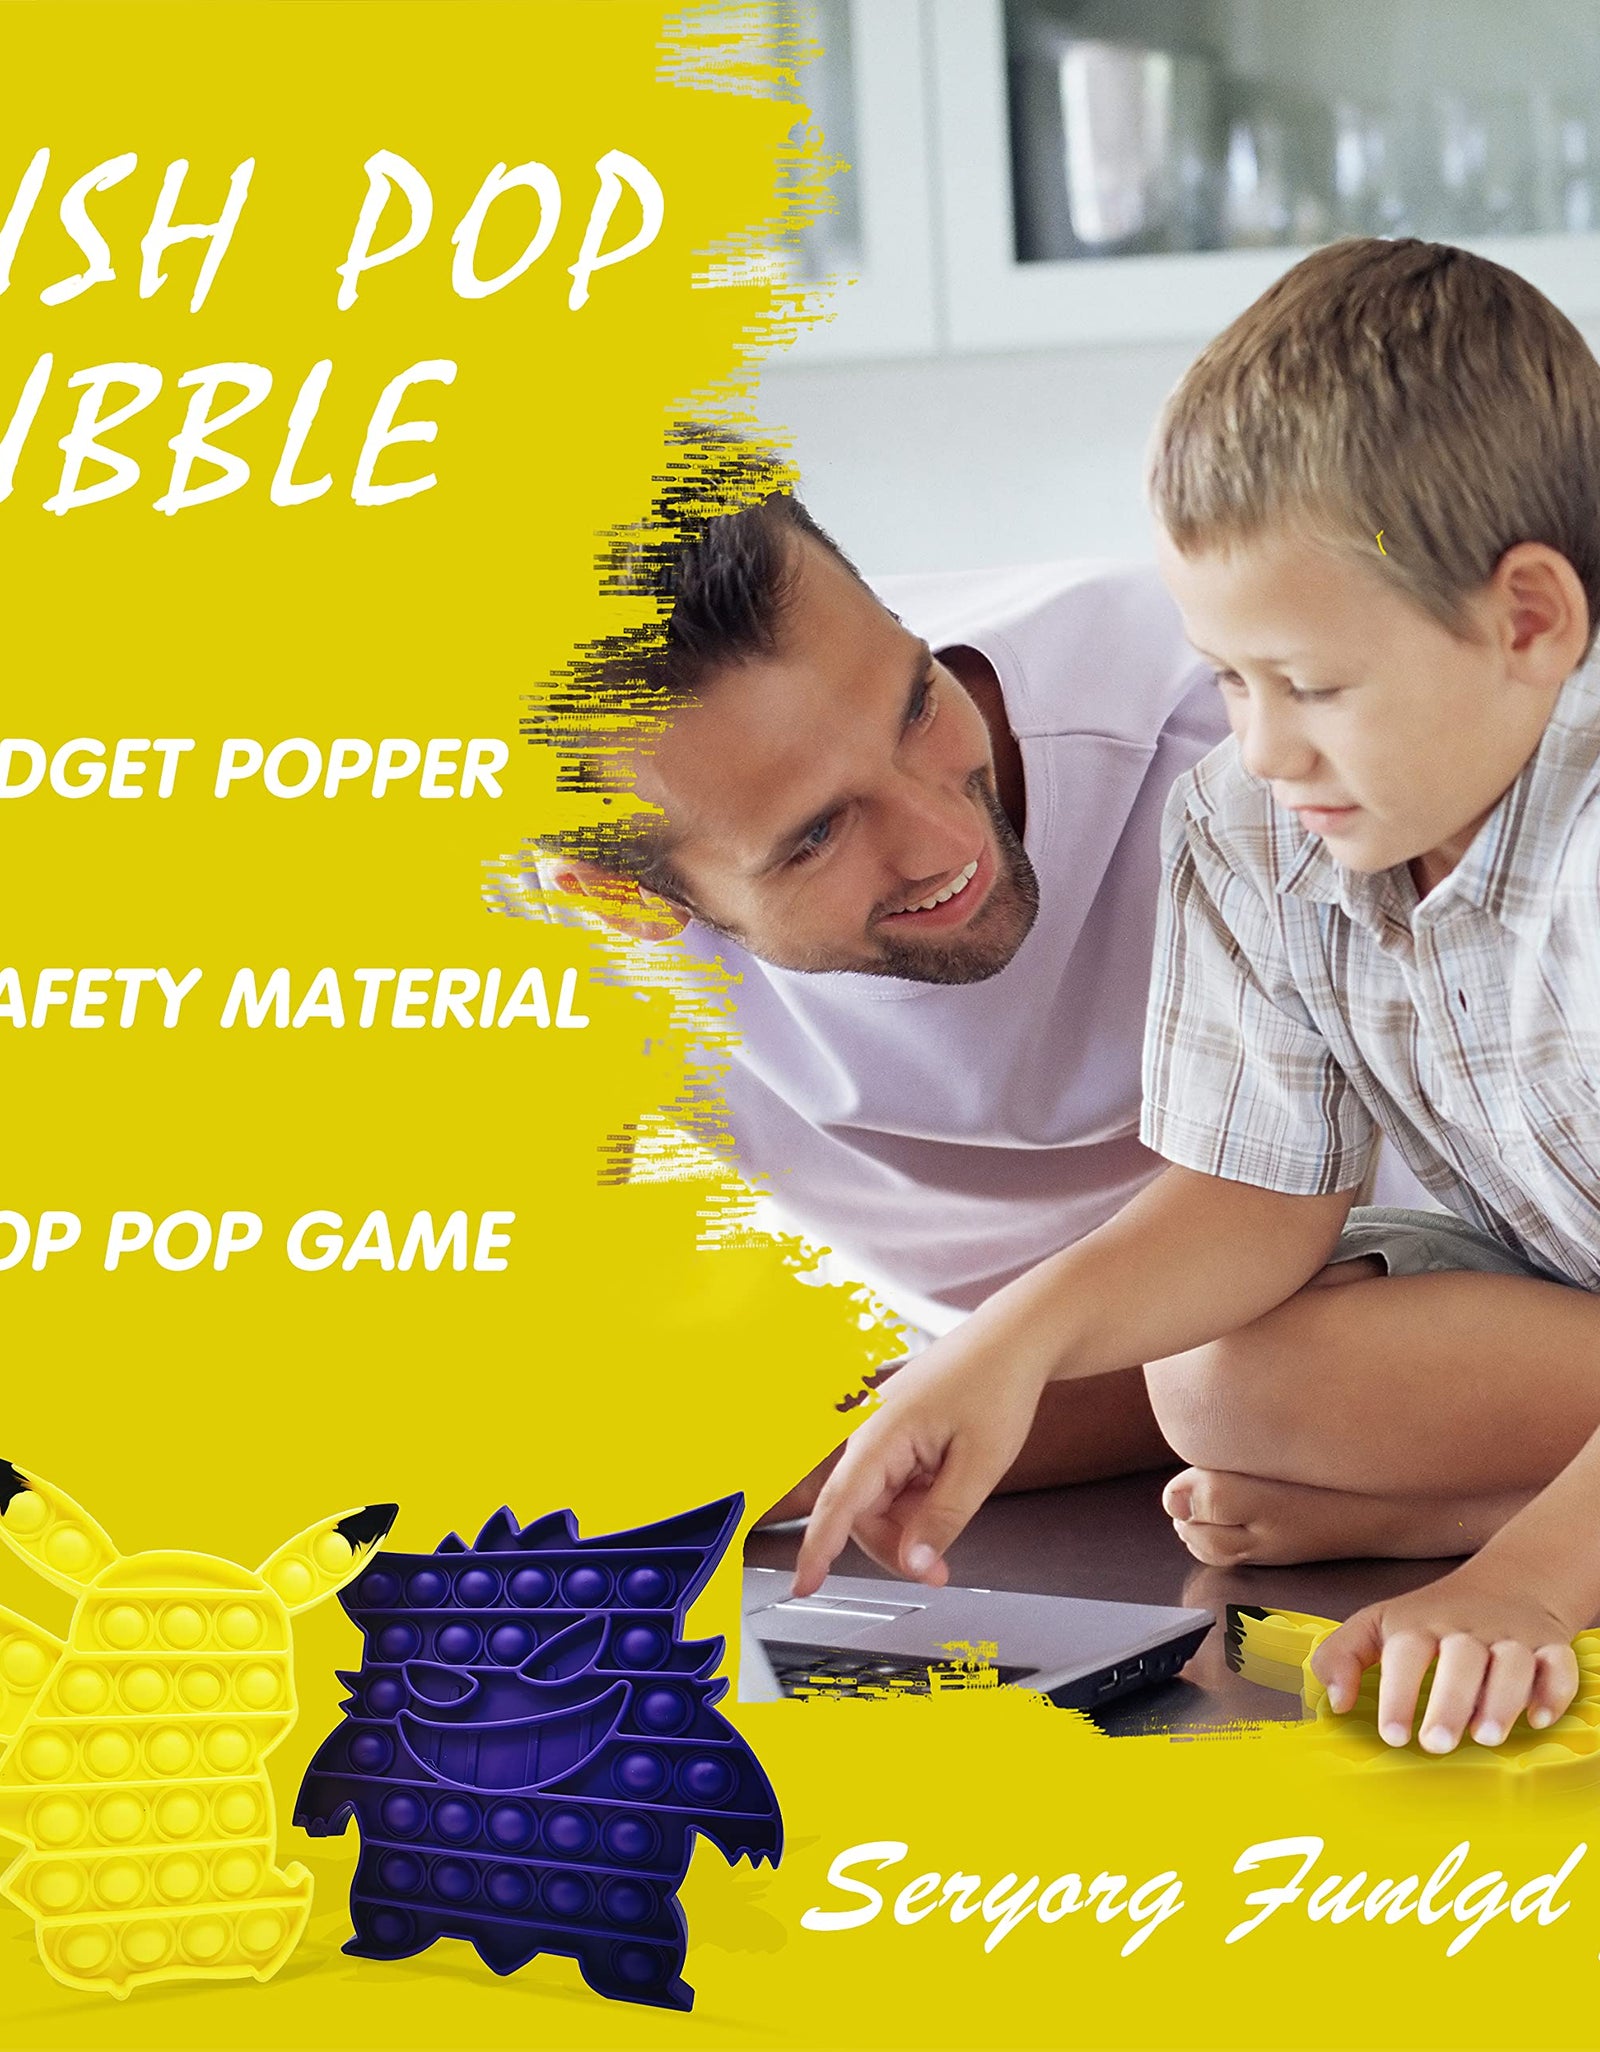 Tie Dye Push Pop Pop Fidget Sensory Toy, Popper Fidget Toy That Suitable for ADHD and Early Educational Toddler Baby, Mega Pop Fidgets for Girls and Kids (PKQ-Yellow)